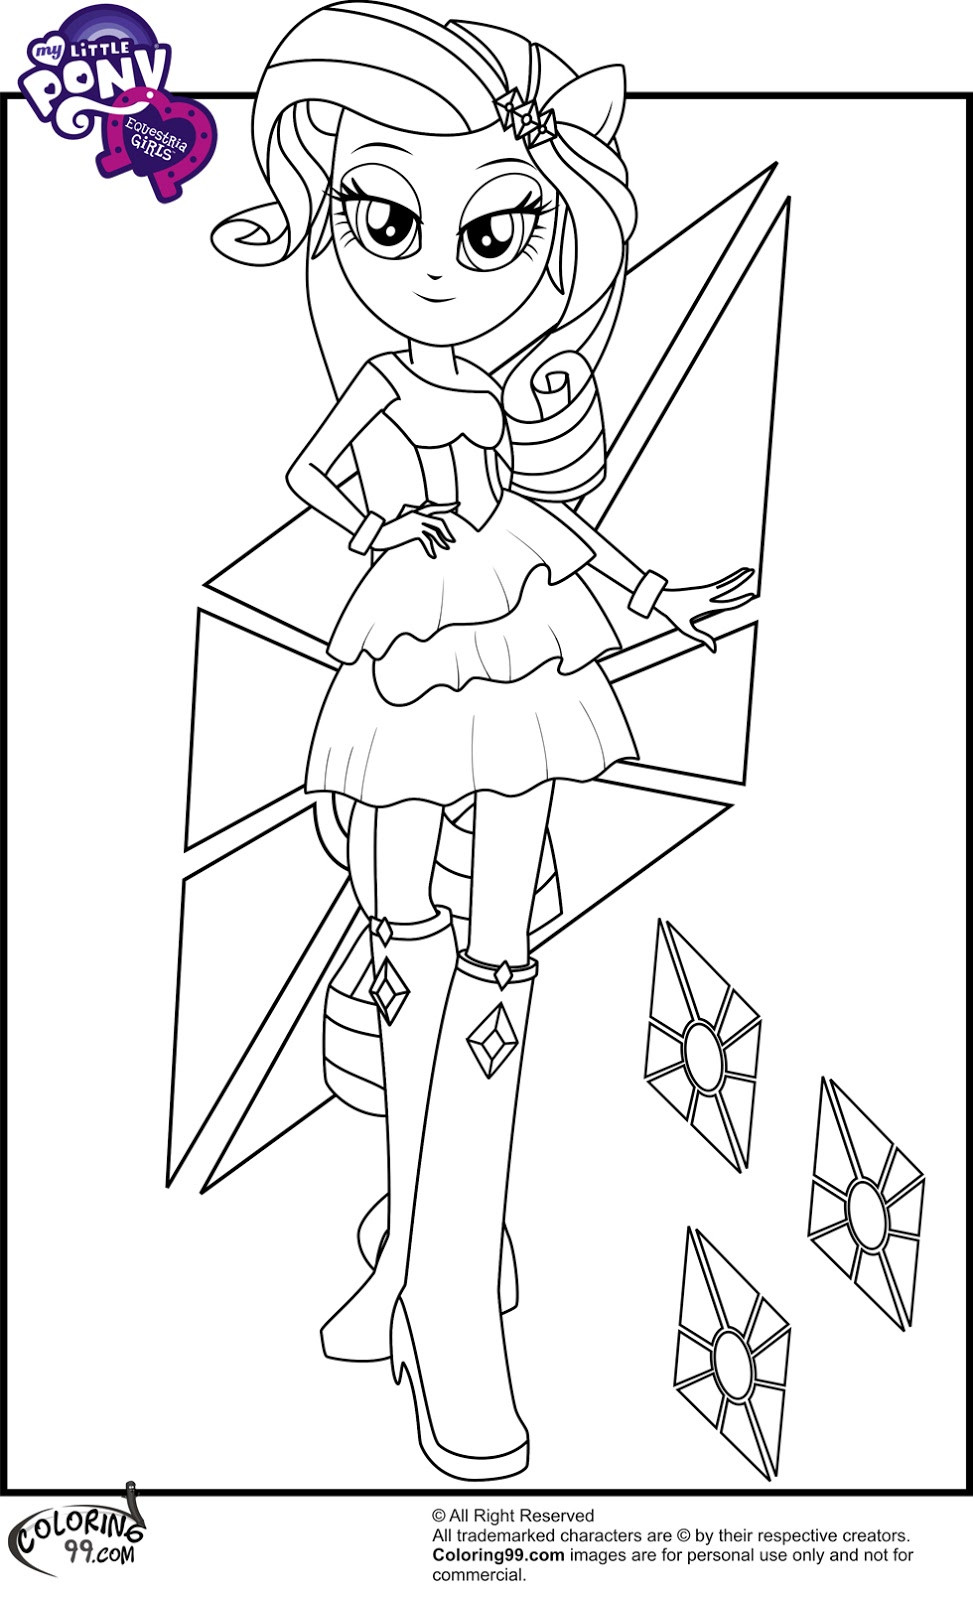 Equestria Girls Coloring Pages
 My Little Pony Equestria Girls Coloring Pages